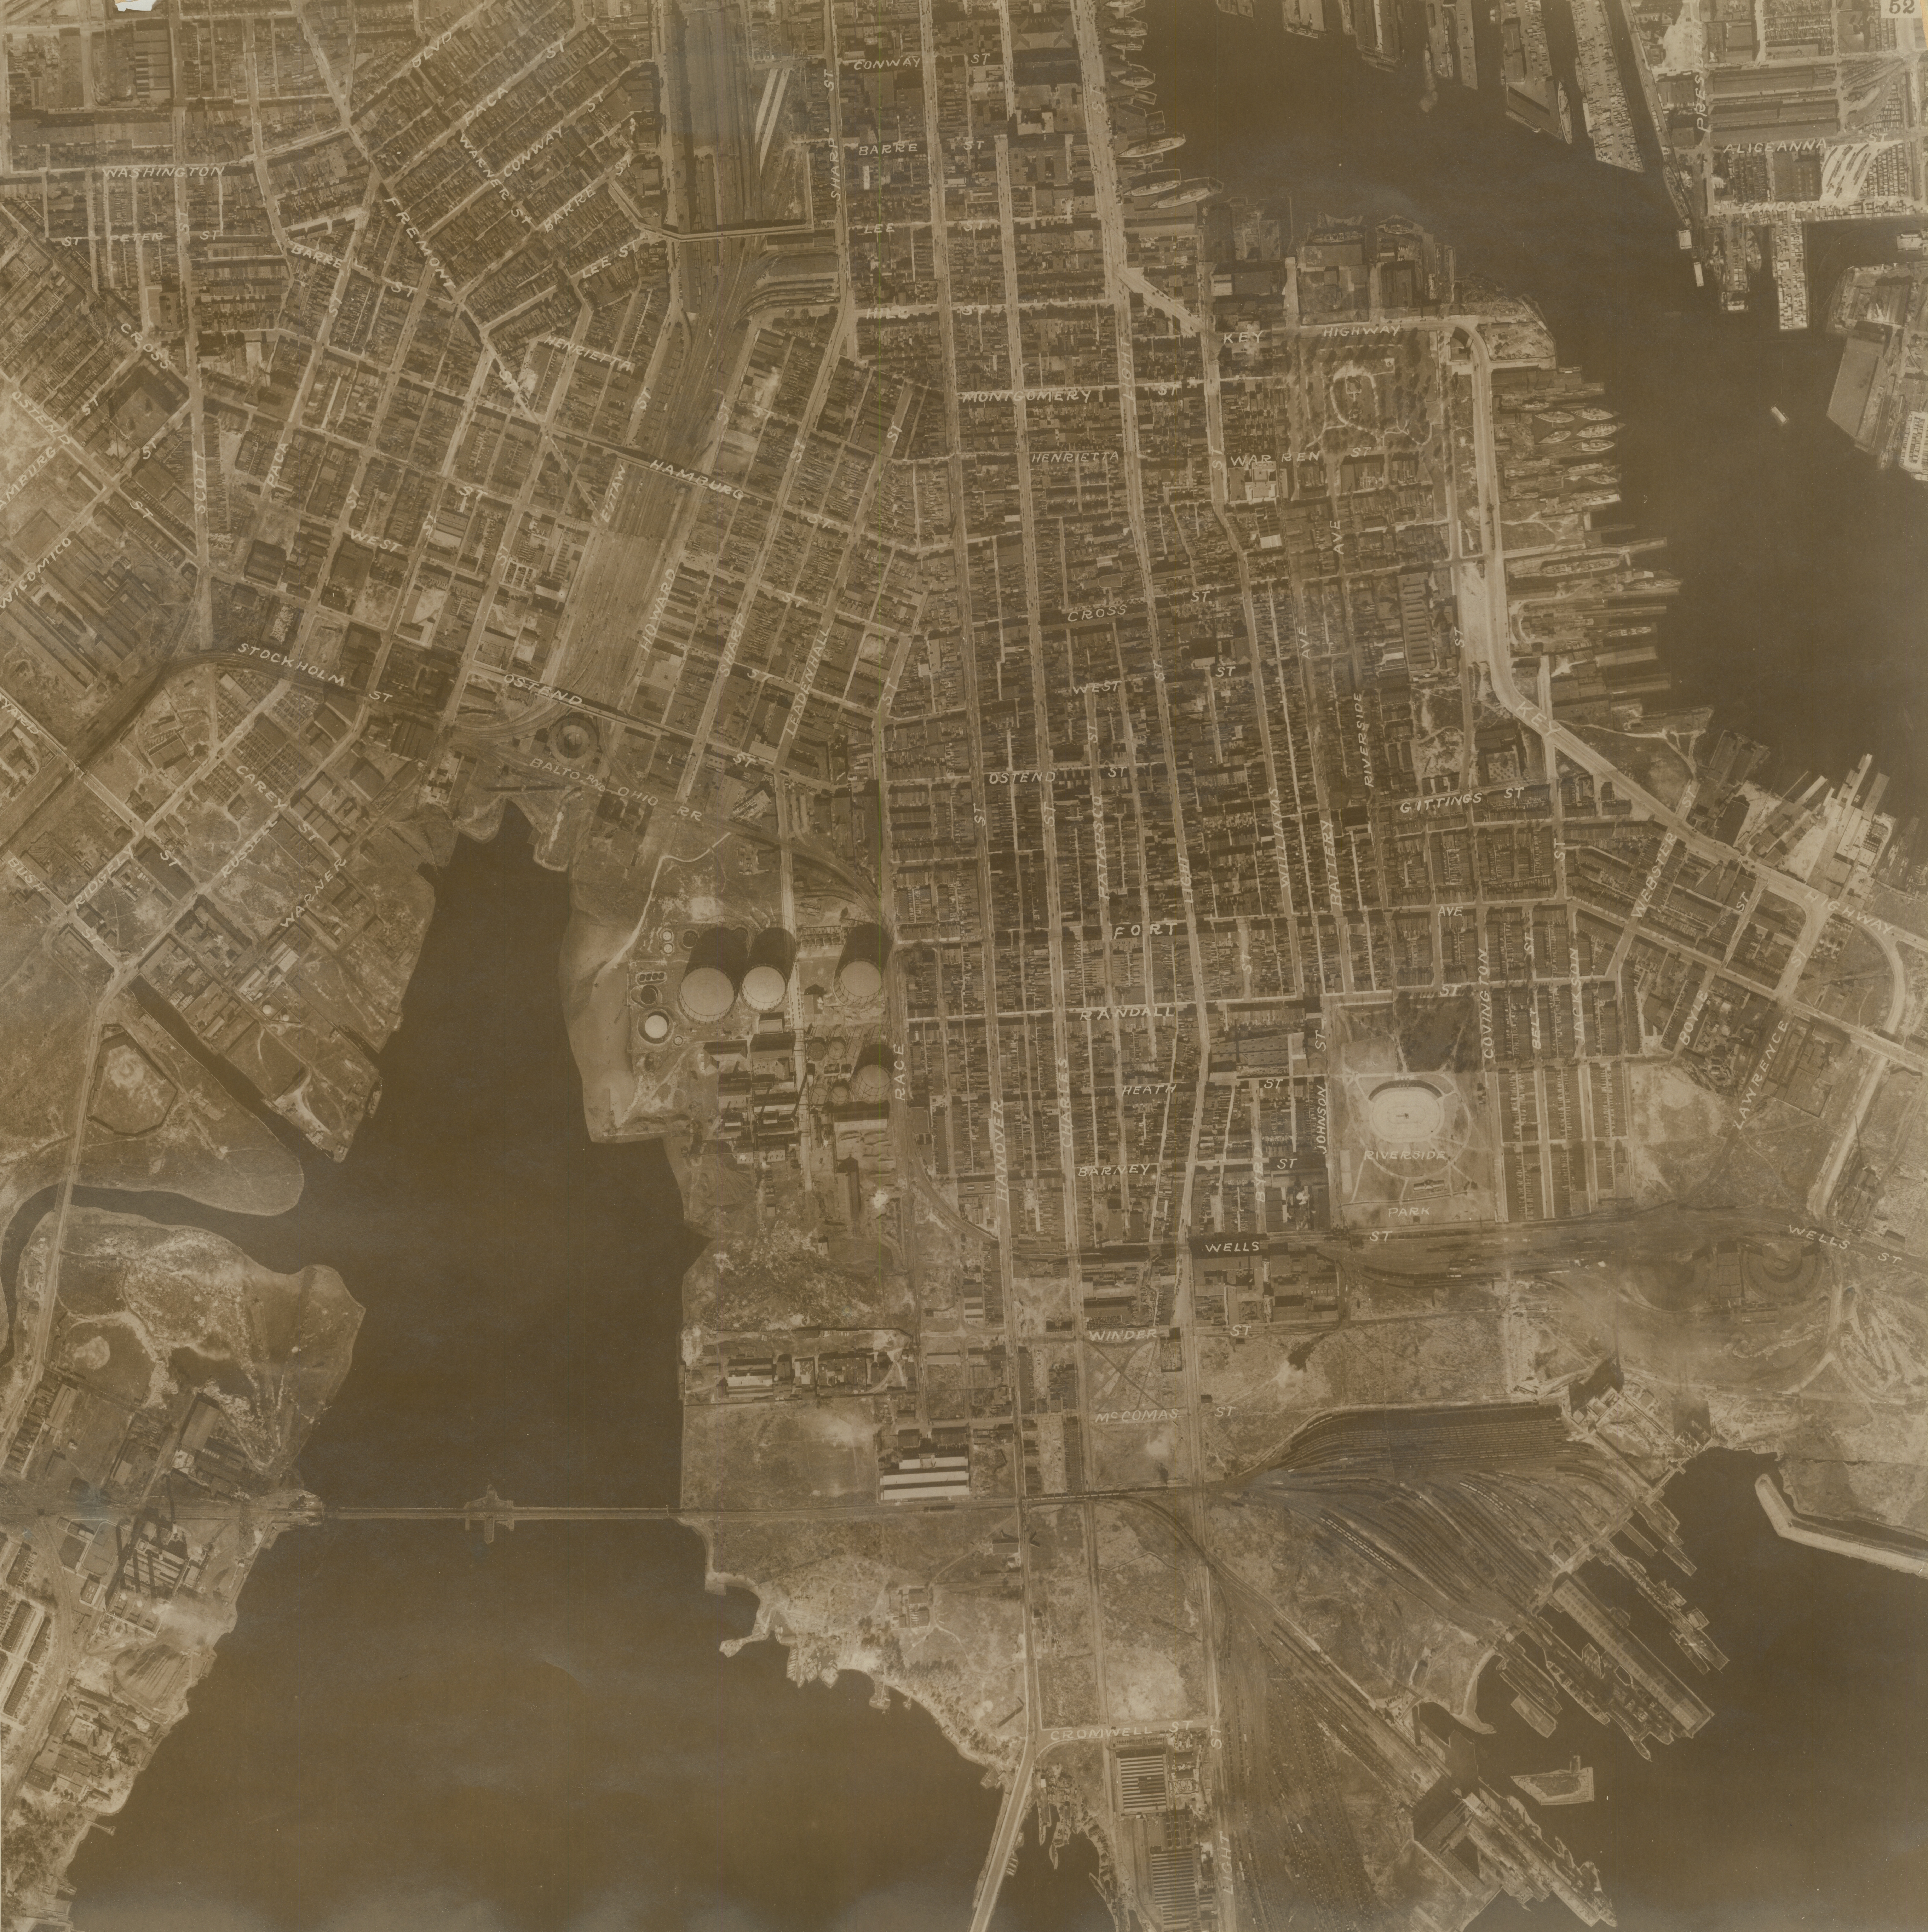 1927 aerial view of Baltimore